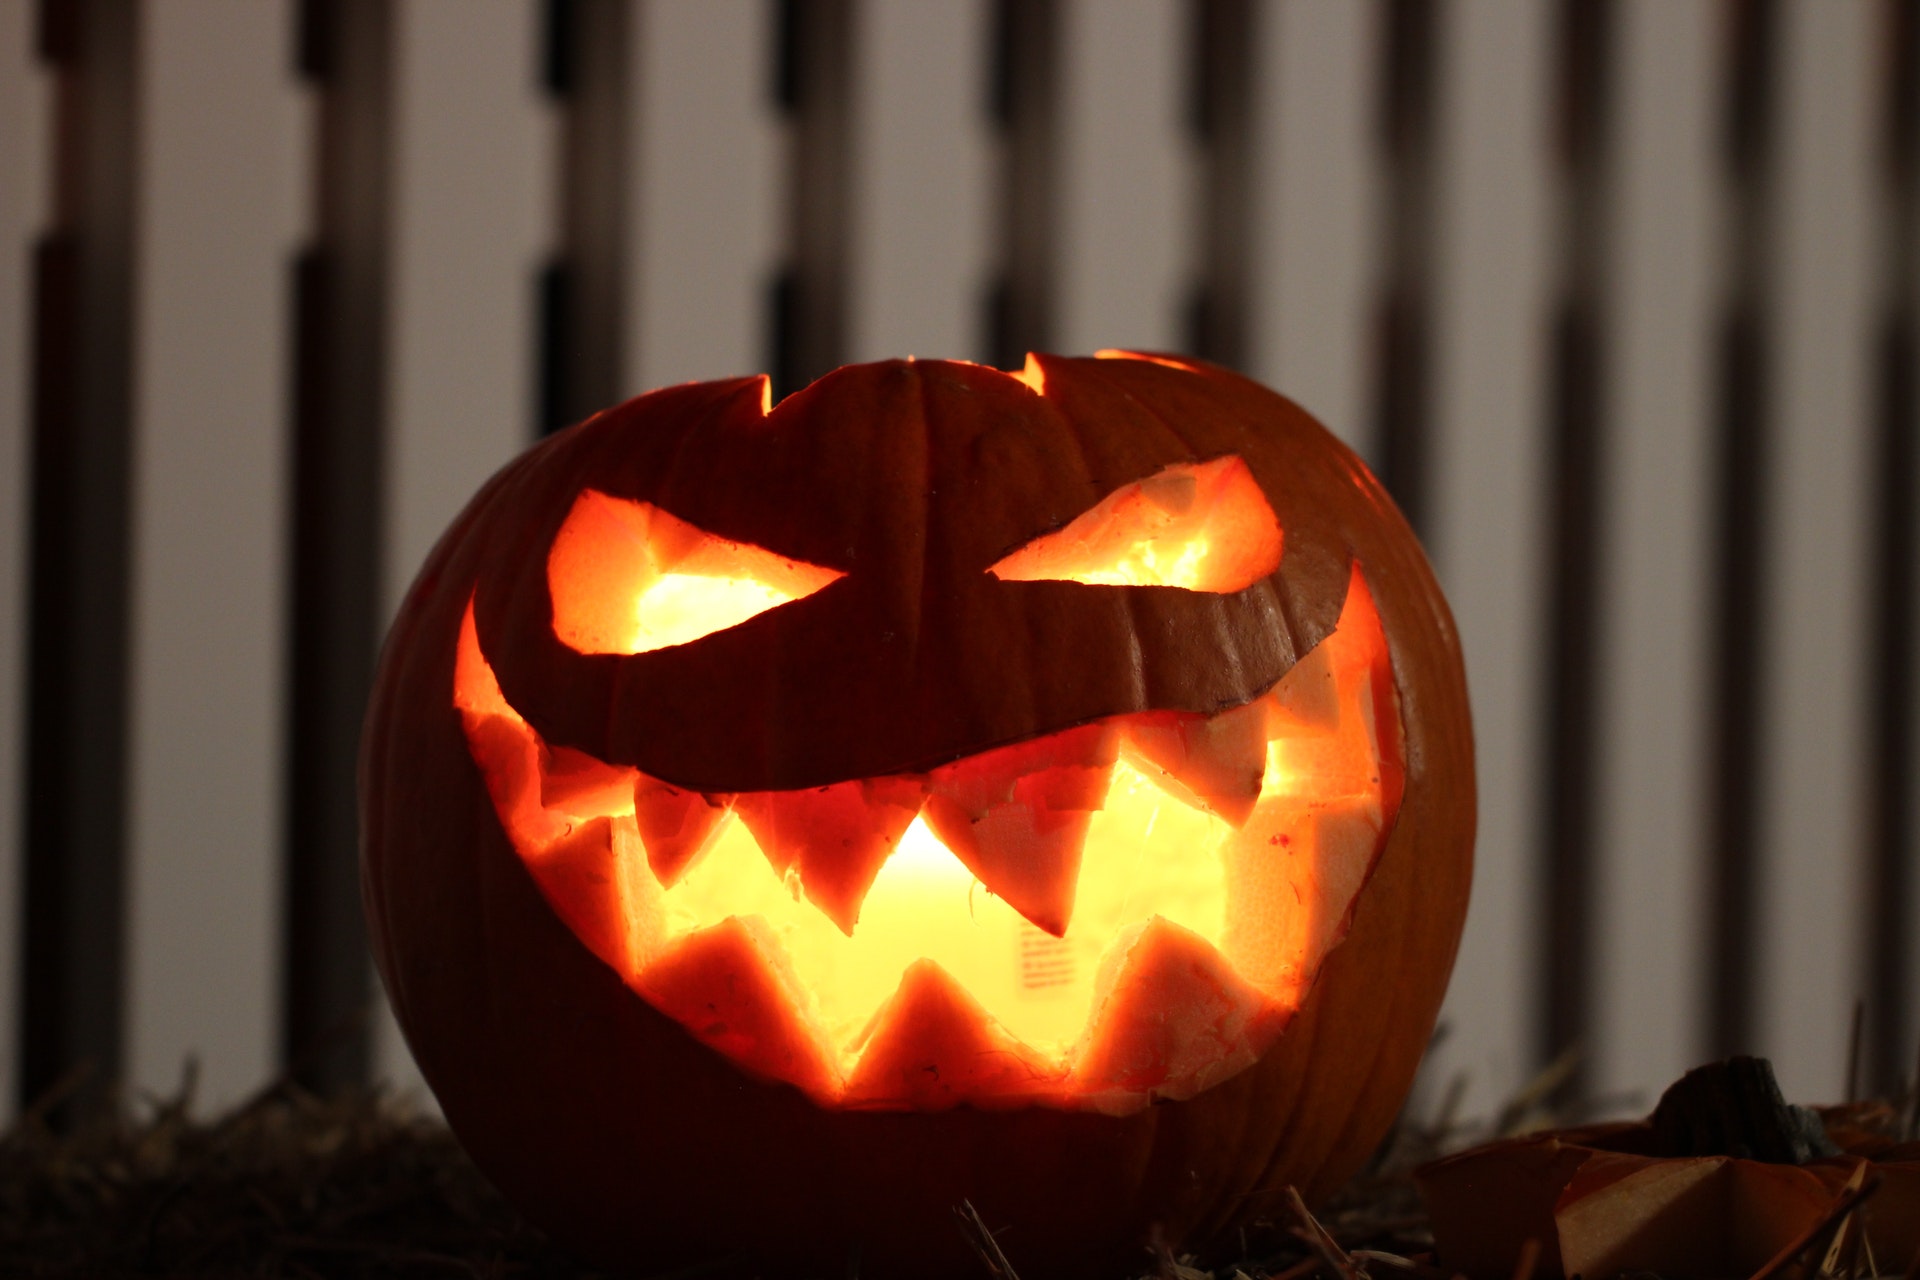 American Culture: History of Halloween